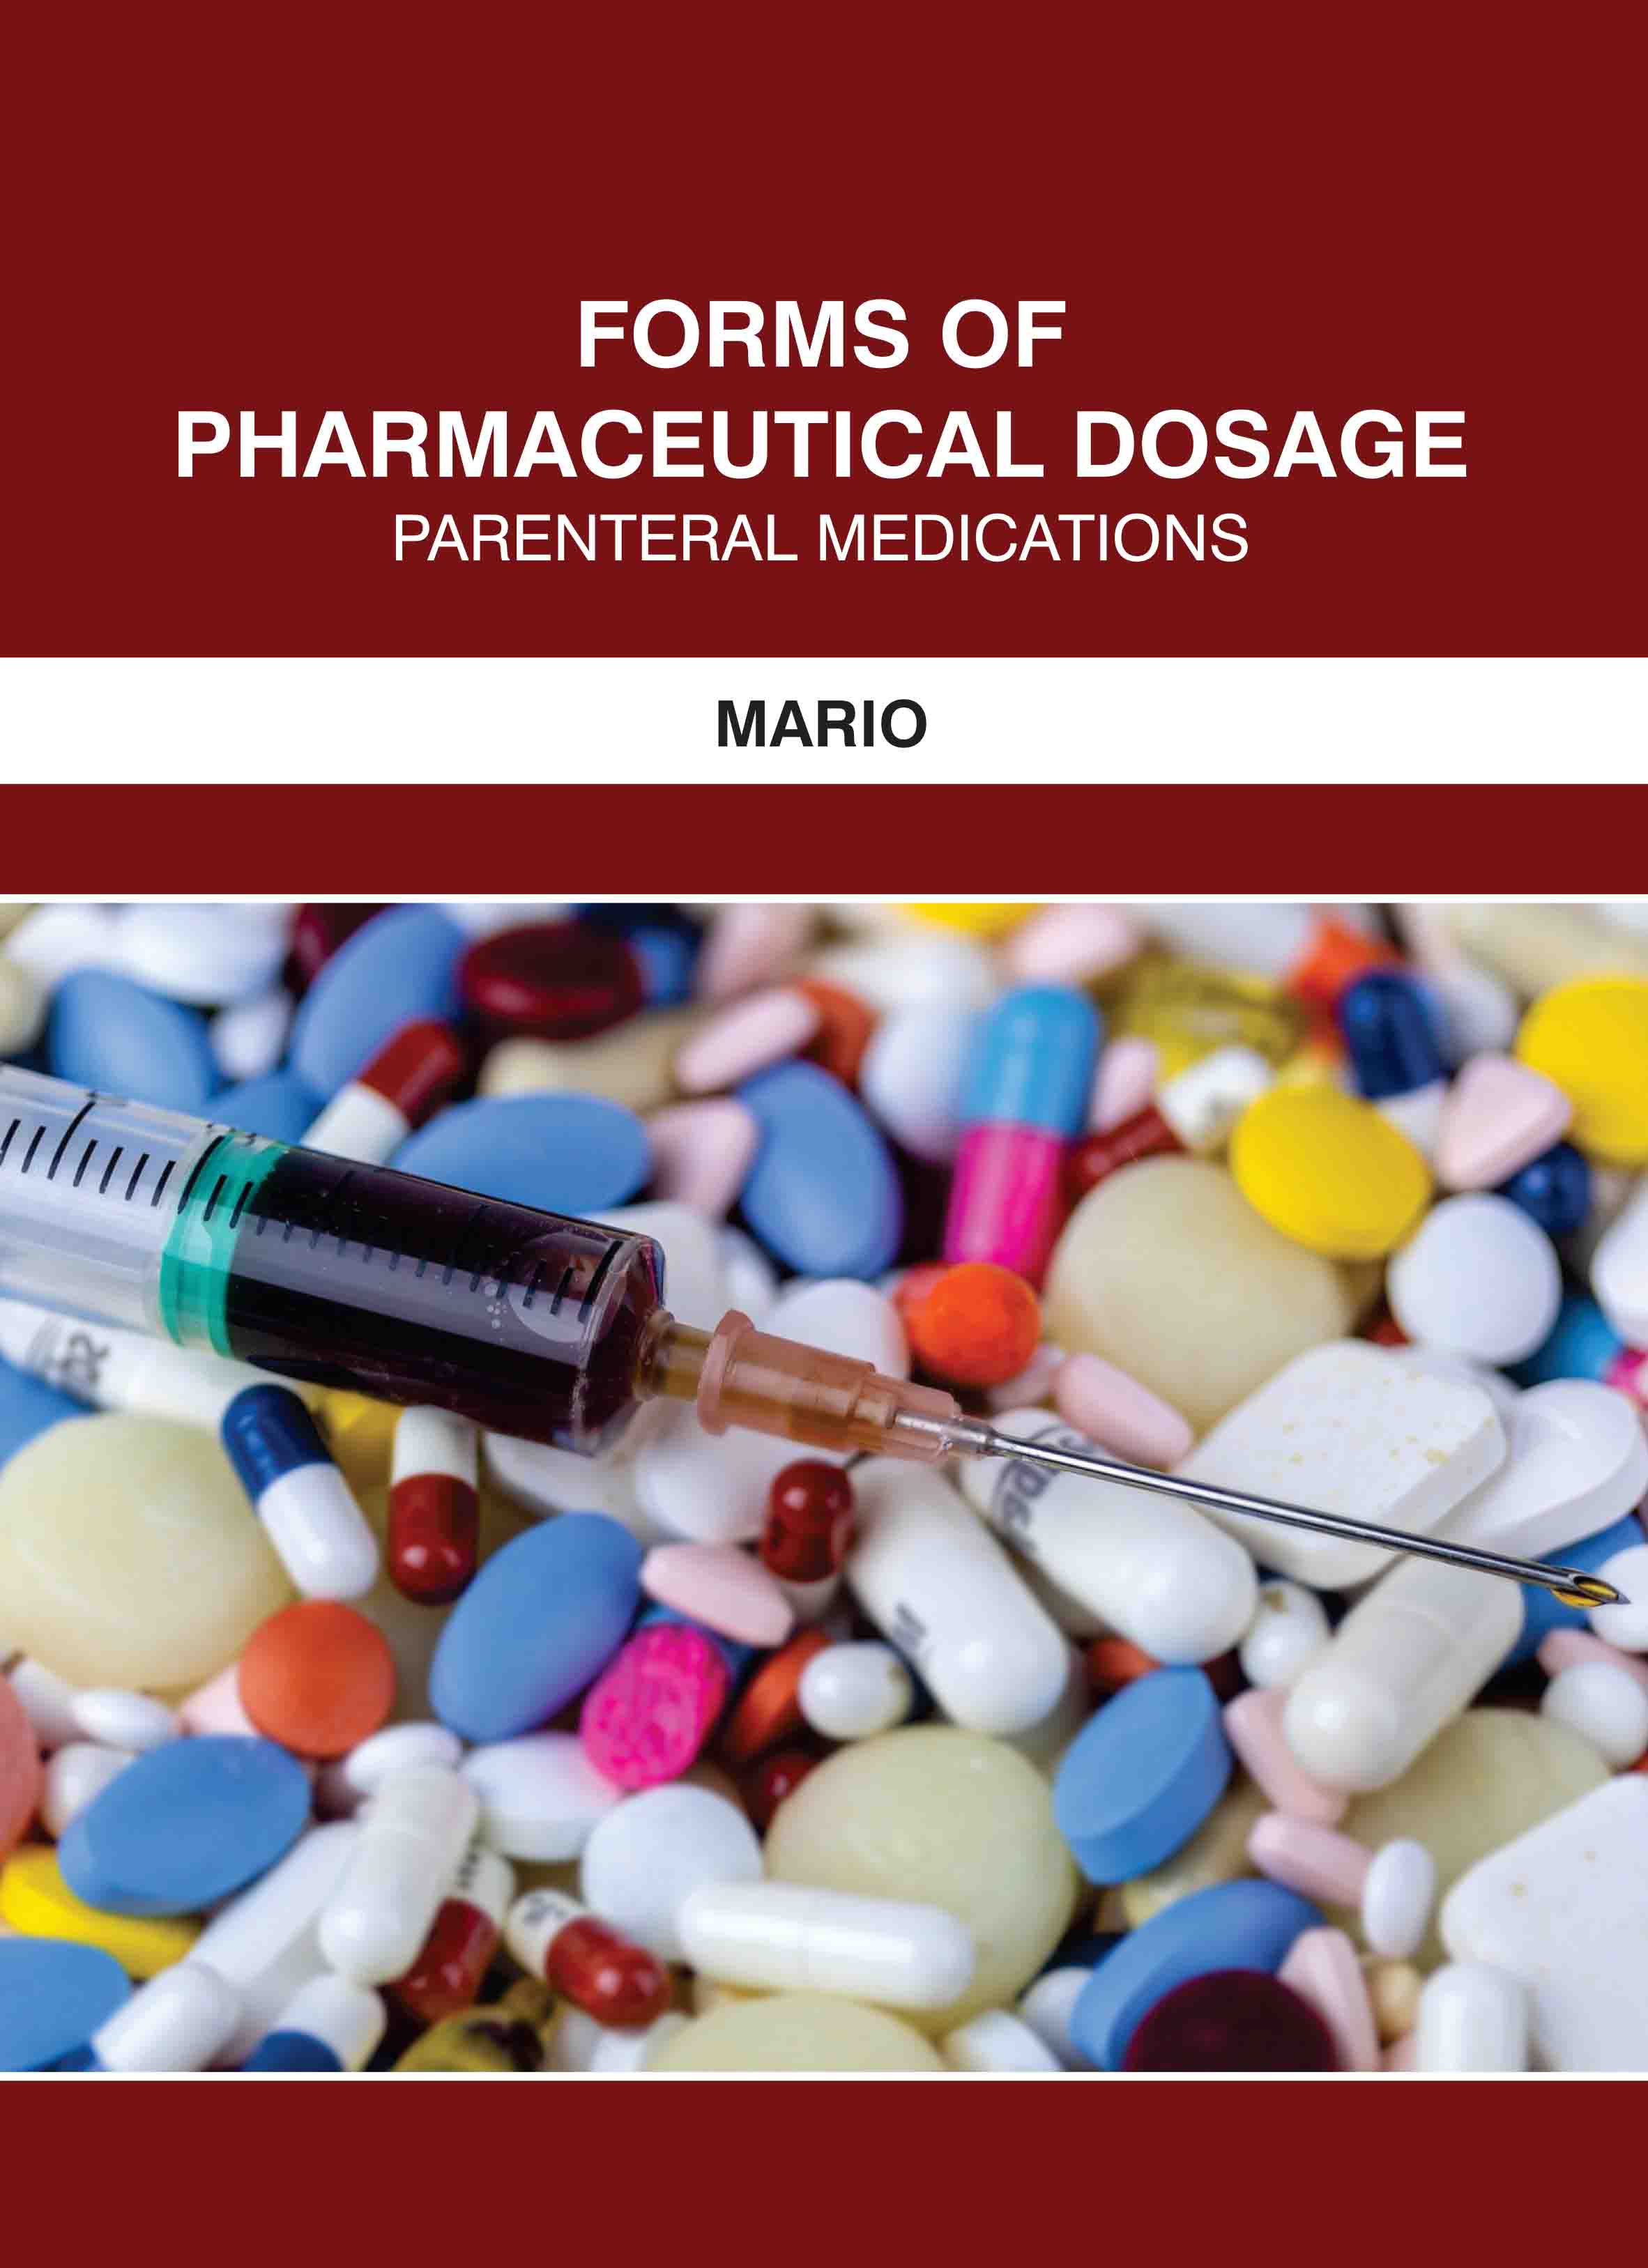 Forms of Pharmaceutical Dosage: Parenteral Medications